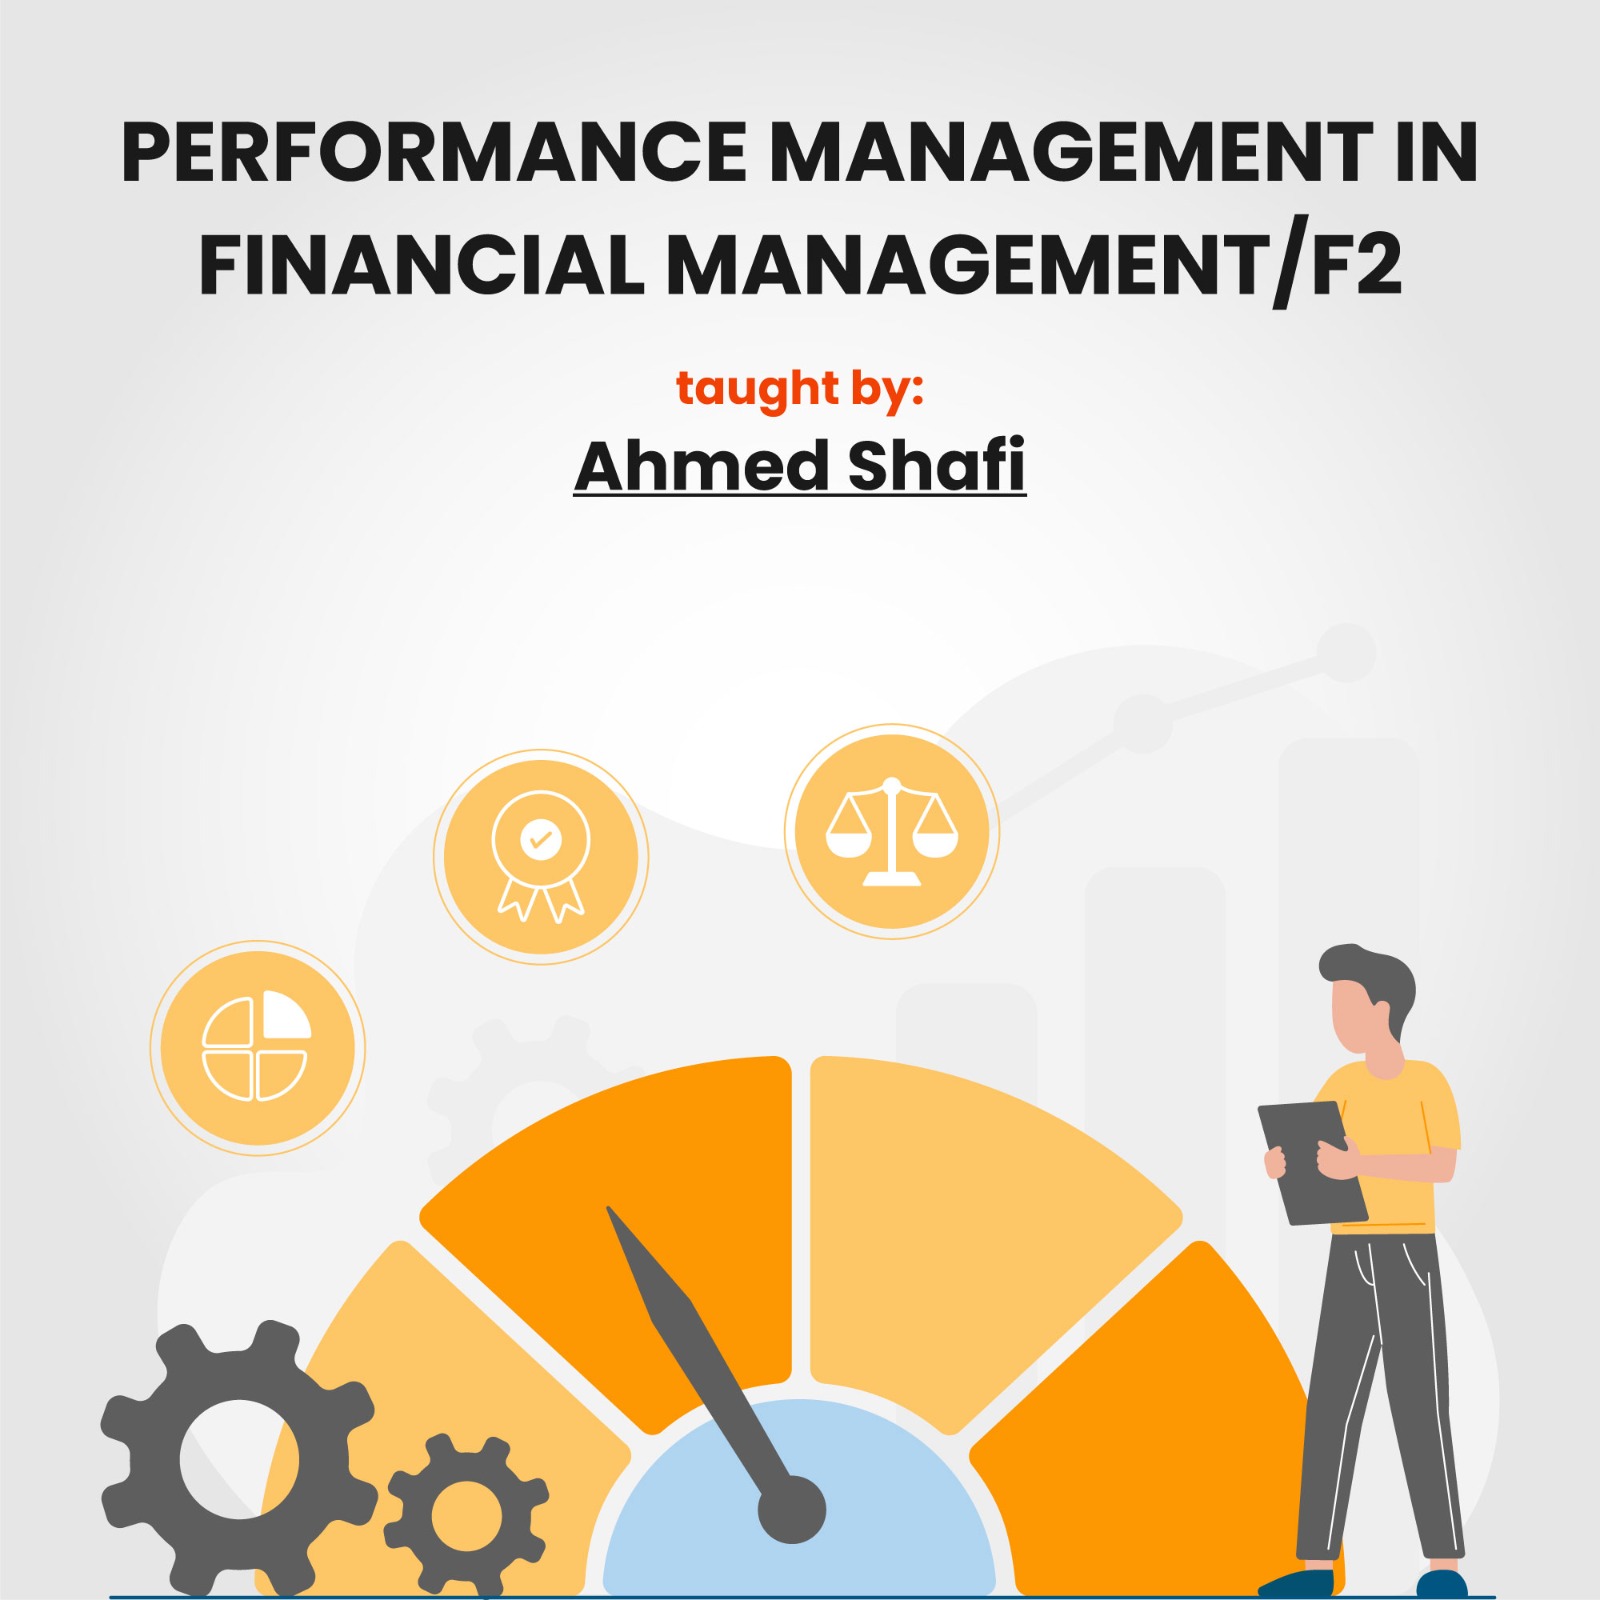 performance management in financial management/F2